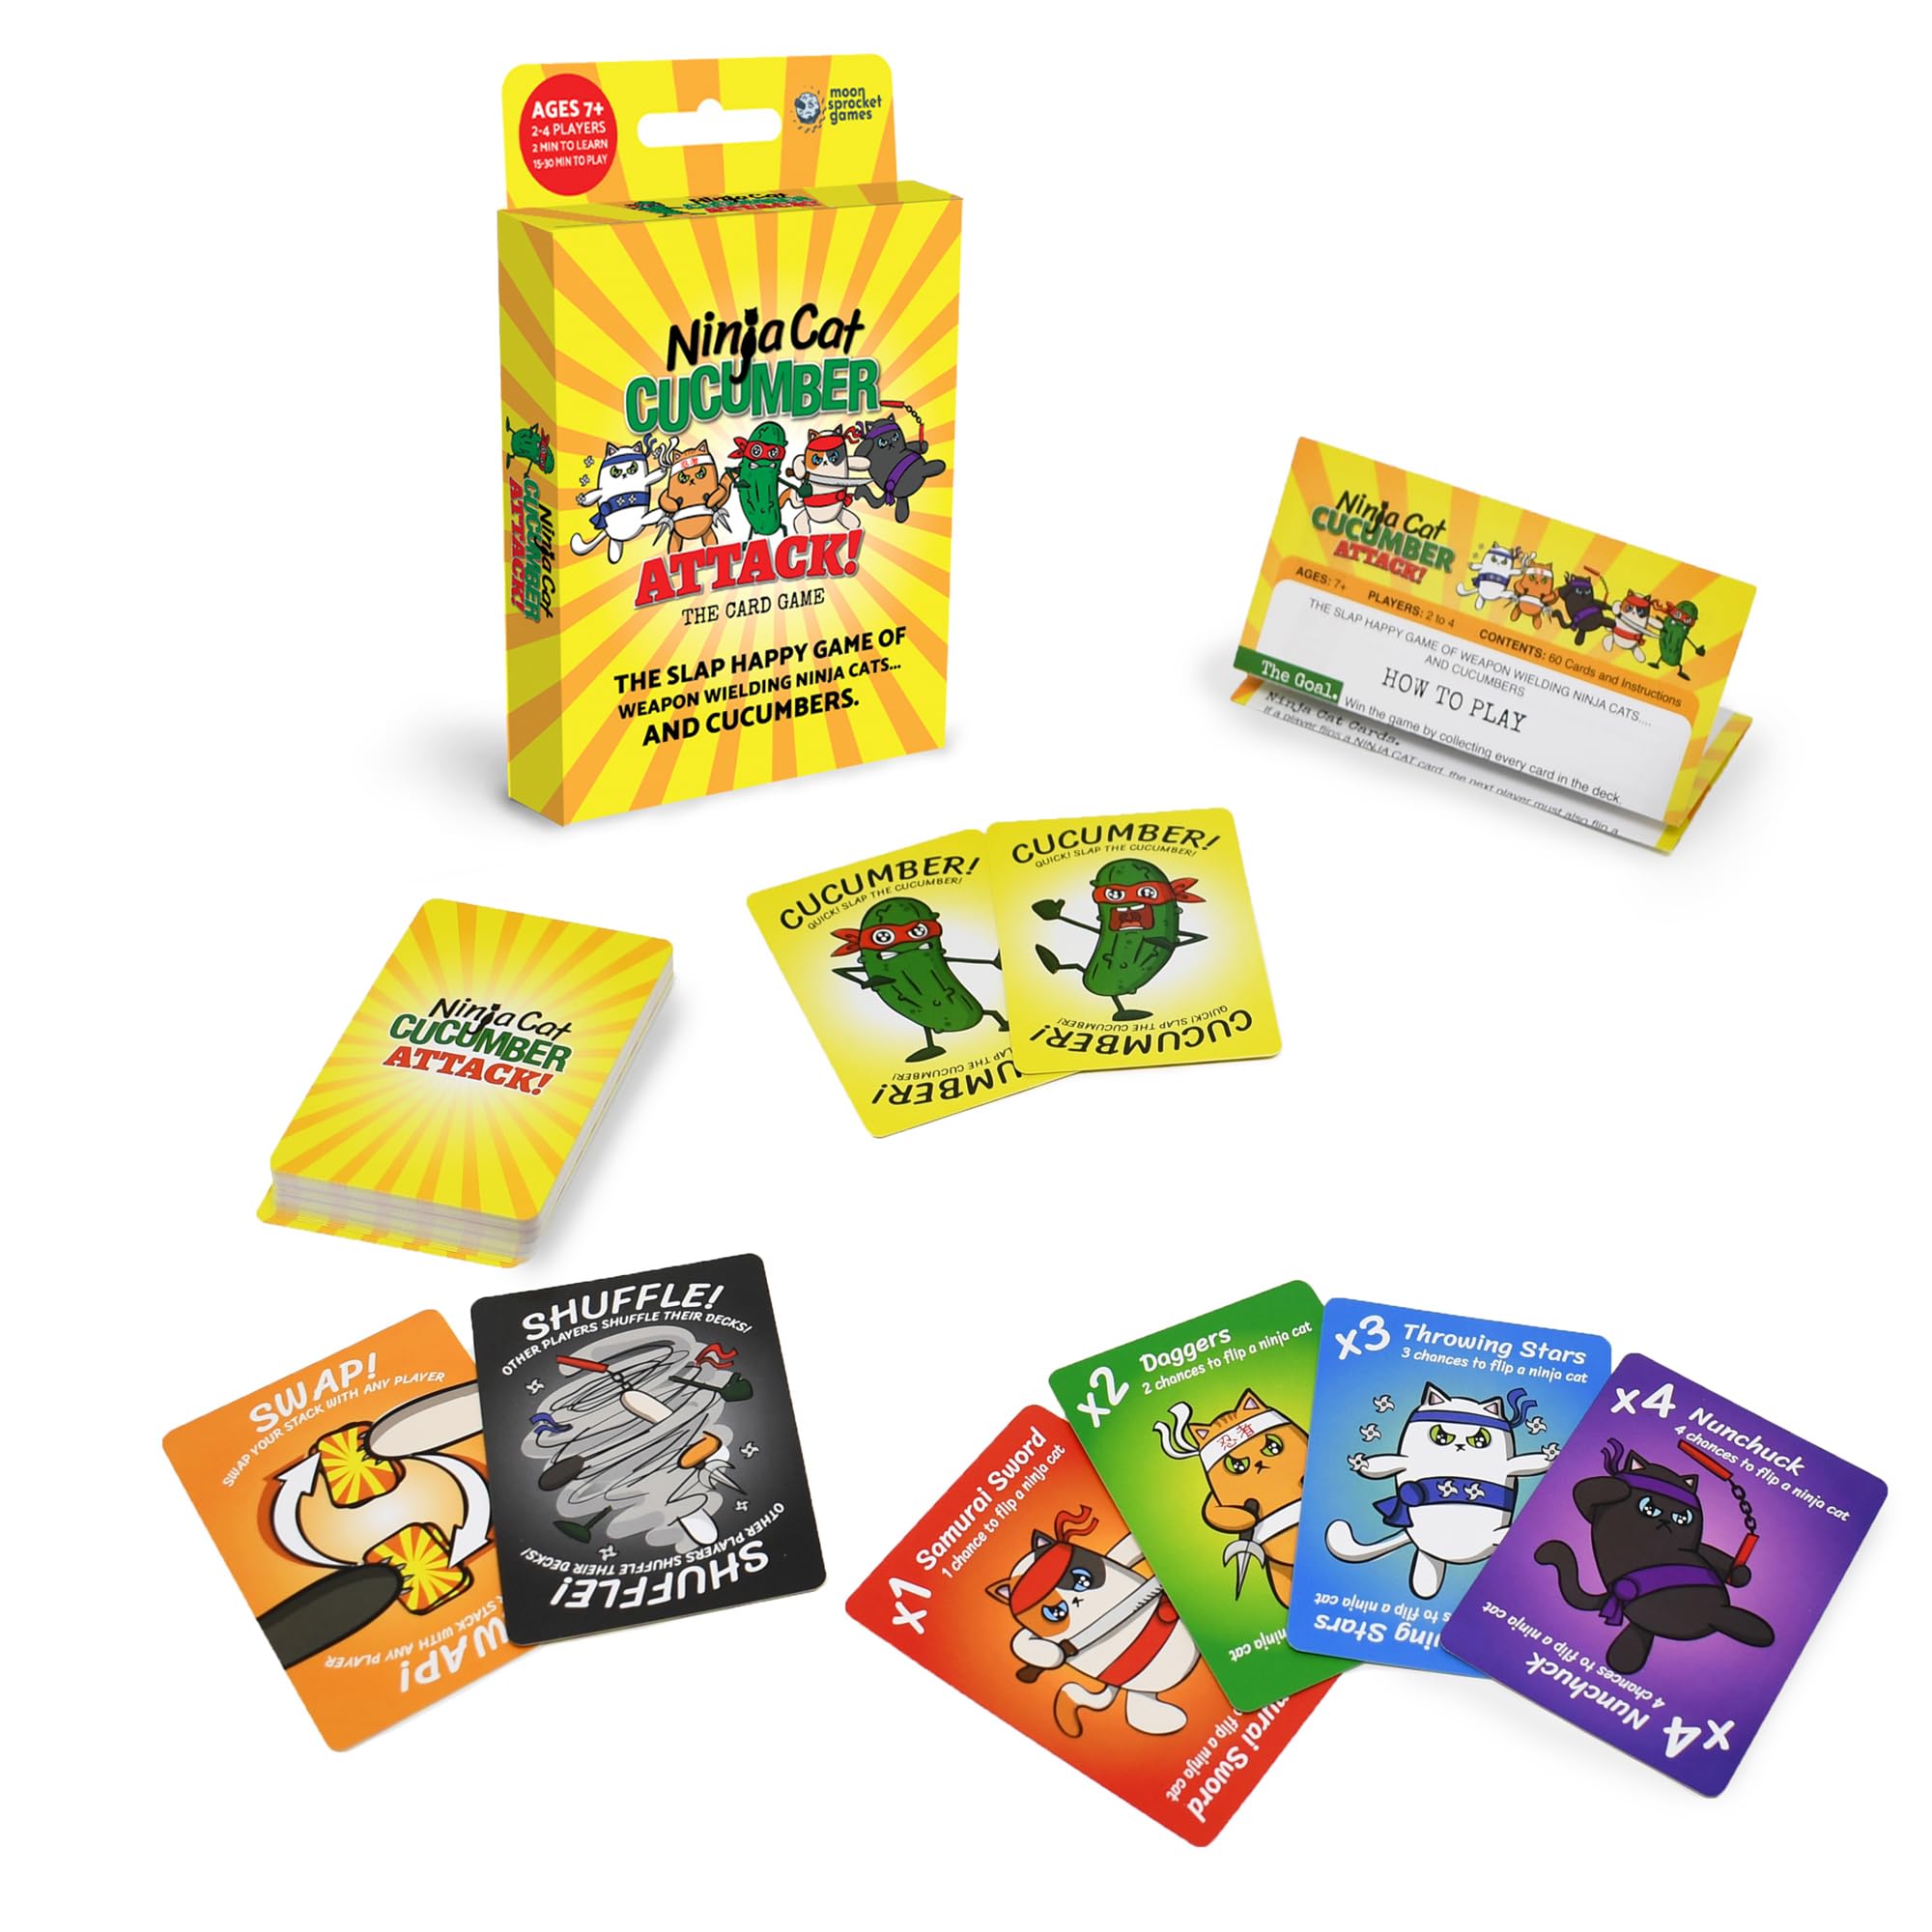 Moonsprocket Games Ninja Cat Cucumber Attack! Card Game - Fast-Paced Slap-Happy Game of Weapon-Wielding Ninja Cats, Fun for Family Game Night, Ages 5+, 2-4 Players, 13-30 Minute Playtime, Made